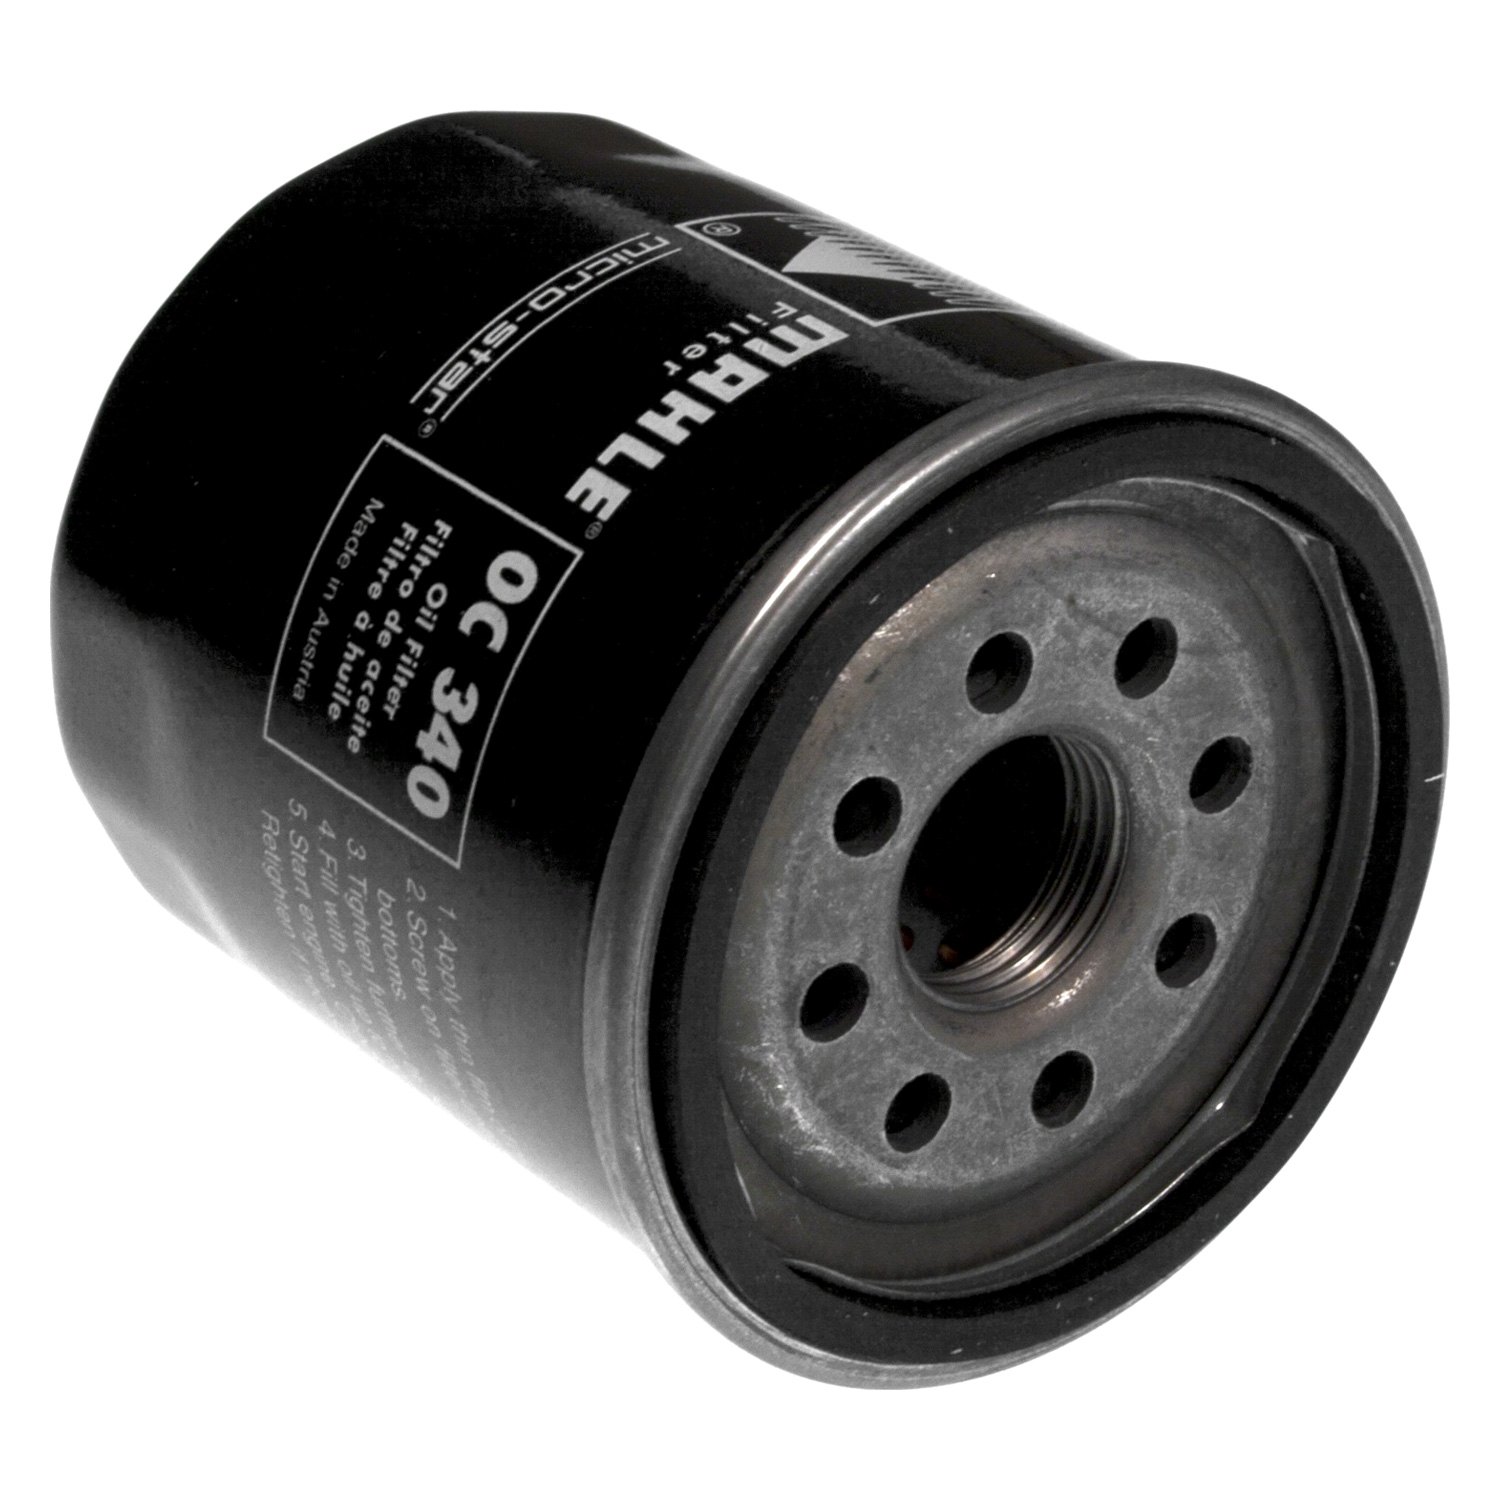 Spin-On Engine Oil Filter - Part Number OC 340 (OC340) by Mahle. 